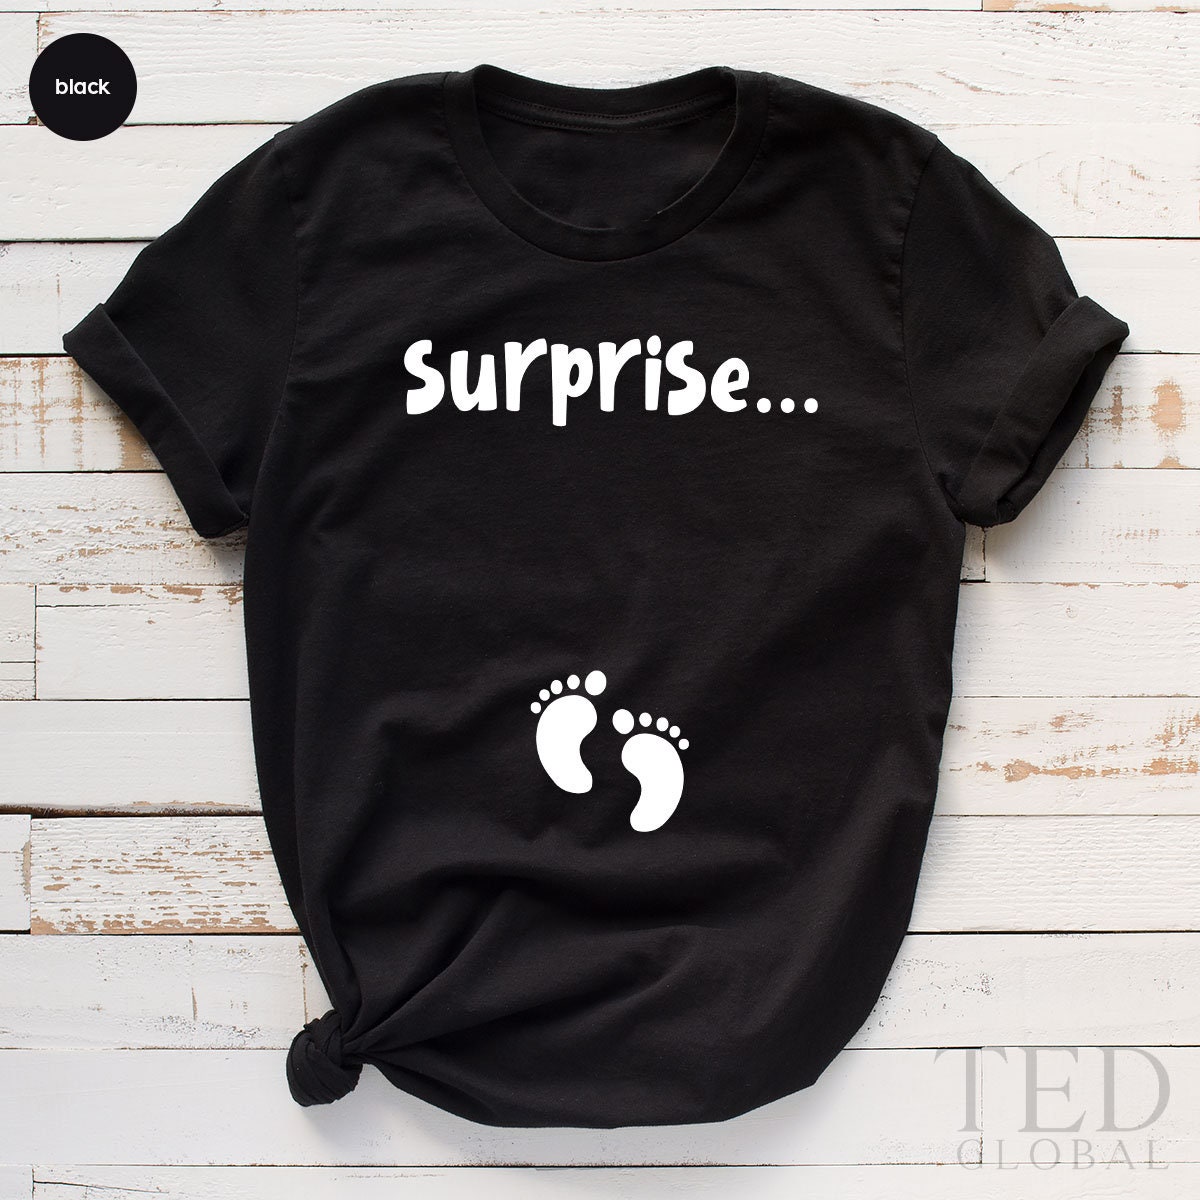 Funny Pregnant Baby Bump Mom Mother Gift Womens Maternity Pregnancy T Shirts